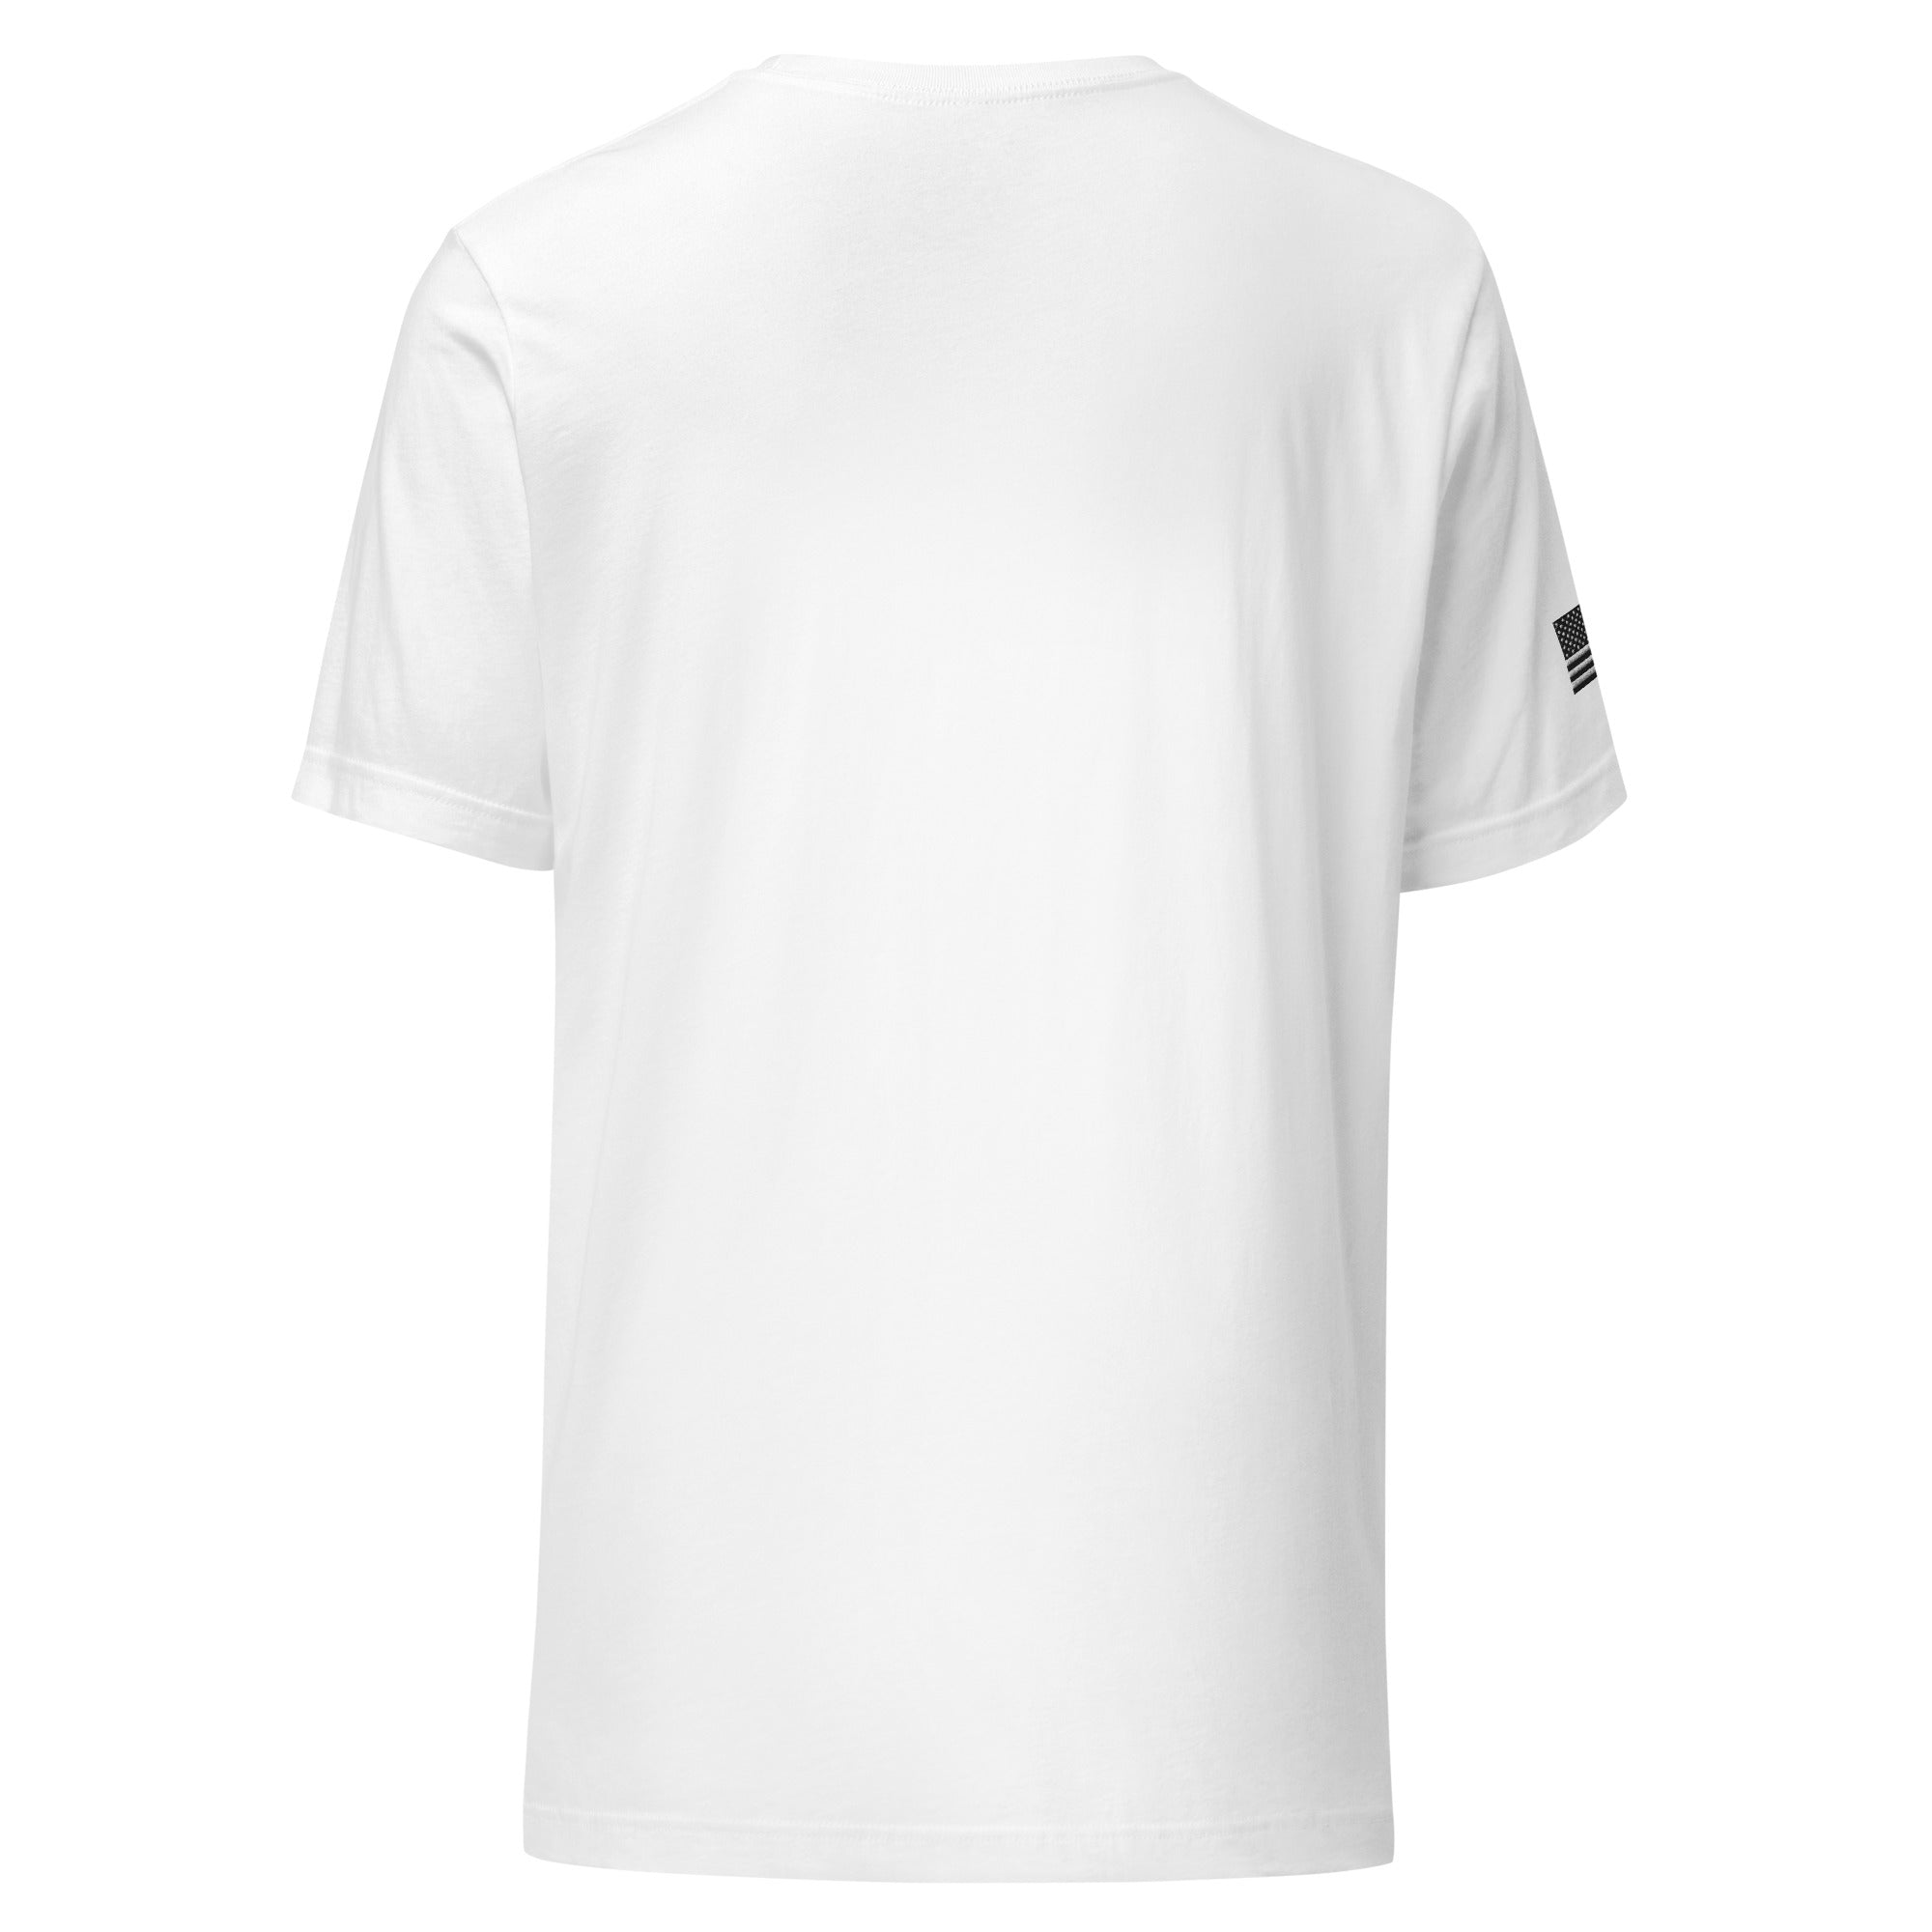 PPN Embroided White Unisex t-shirt